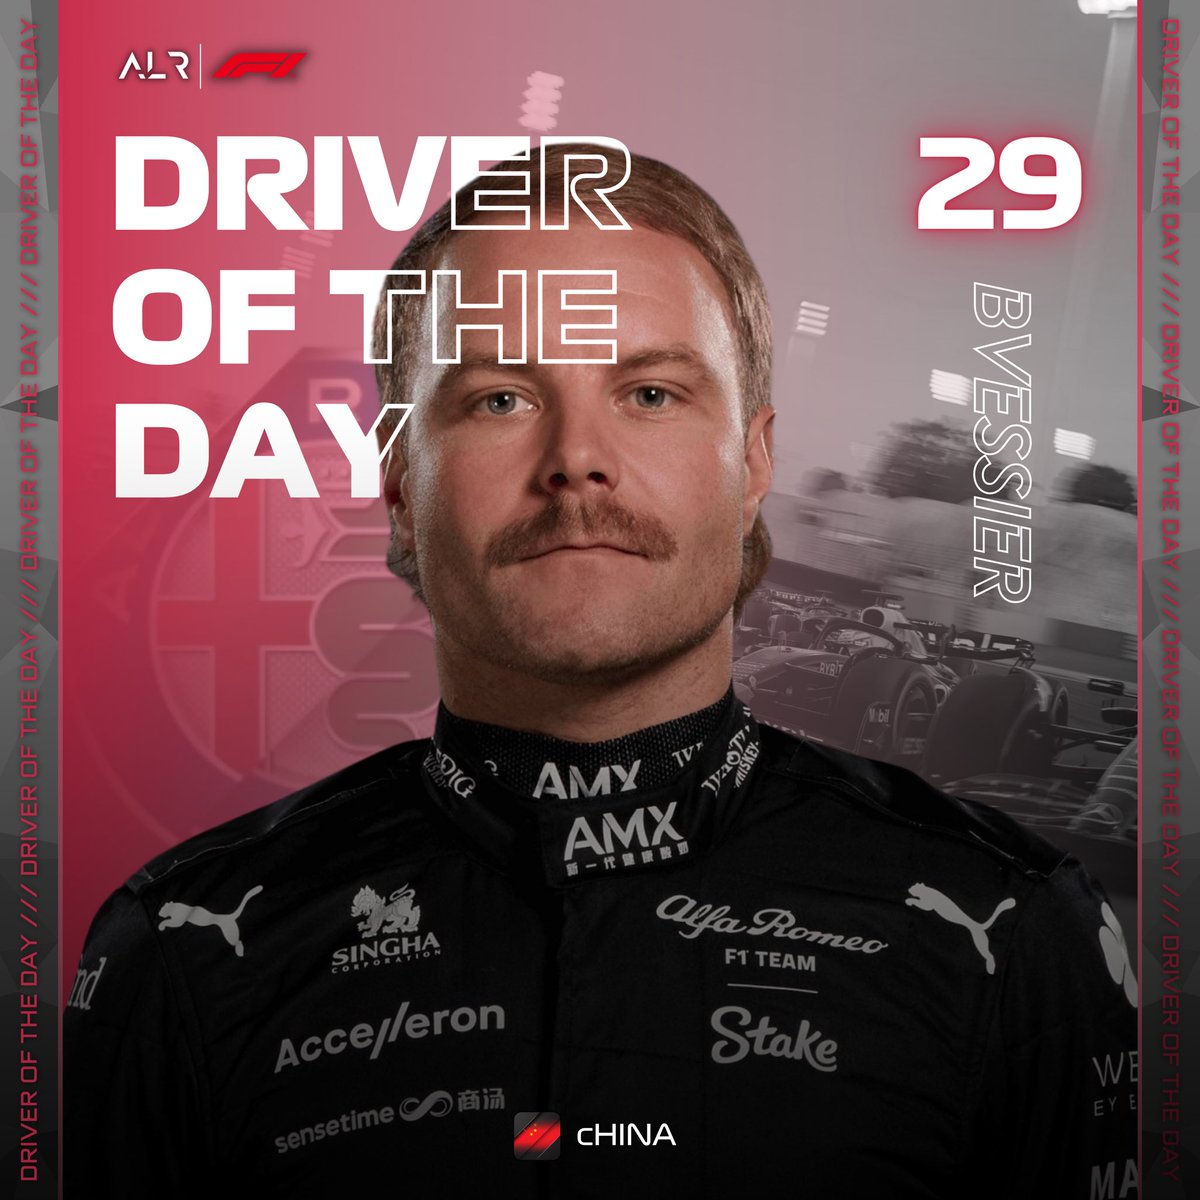 SILVER SEASON 7 🩶 

ROUND 14 - CHINA 🇨🇳 DOTD

@SylvainVessier claims a superb driver of the day in Shanghai! The Alfa Romeo driver secured big points for the team and battled on in the wet with dry tyres to get over the line 🏁!

#F1 #F123 #ALRF1